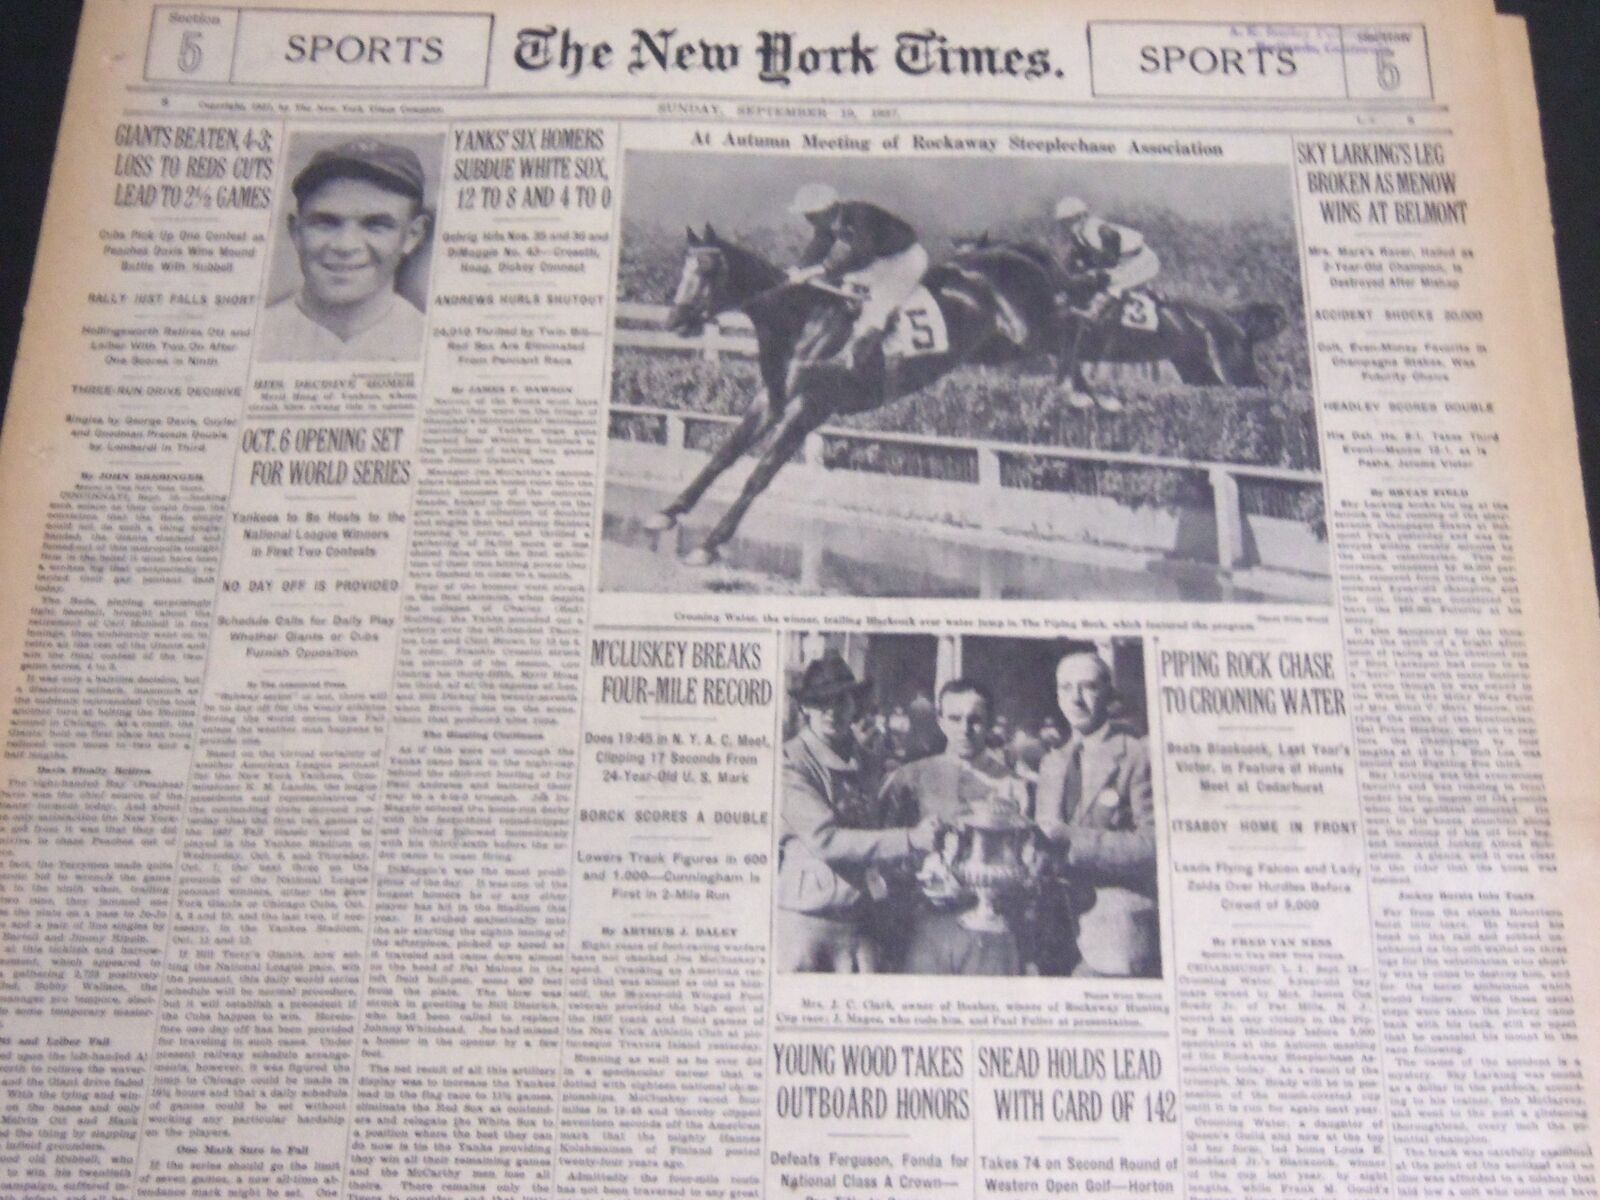 1937 SEPT 19 NEW YORK TIMES SPORTS -BOXING CARNIVAL AT THE POLO GROUNDS- NT 7006